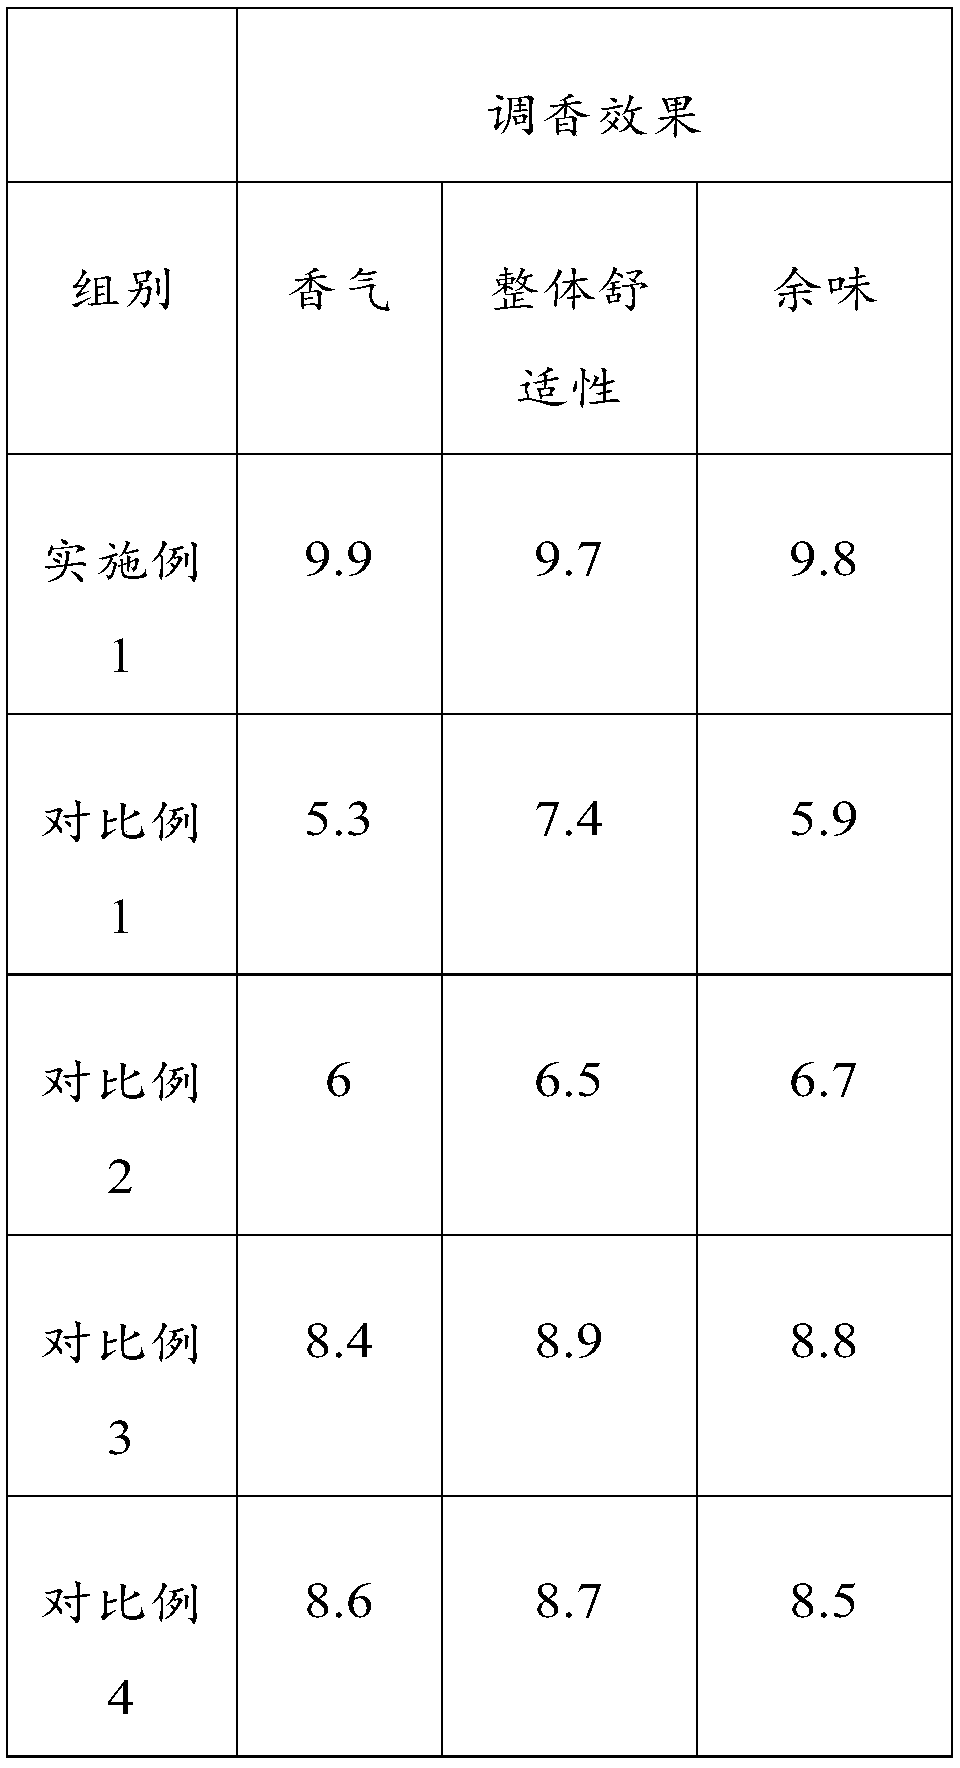 Tobacco composition in flowery style, fuming segment and heating incombustible cigarette stick